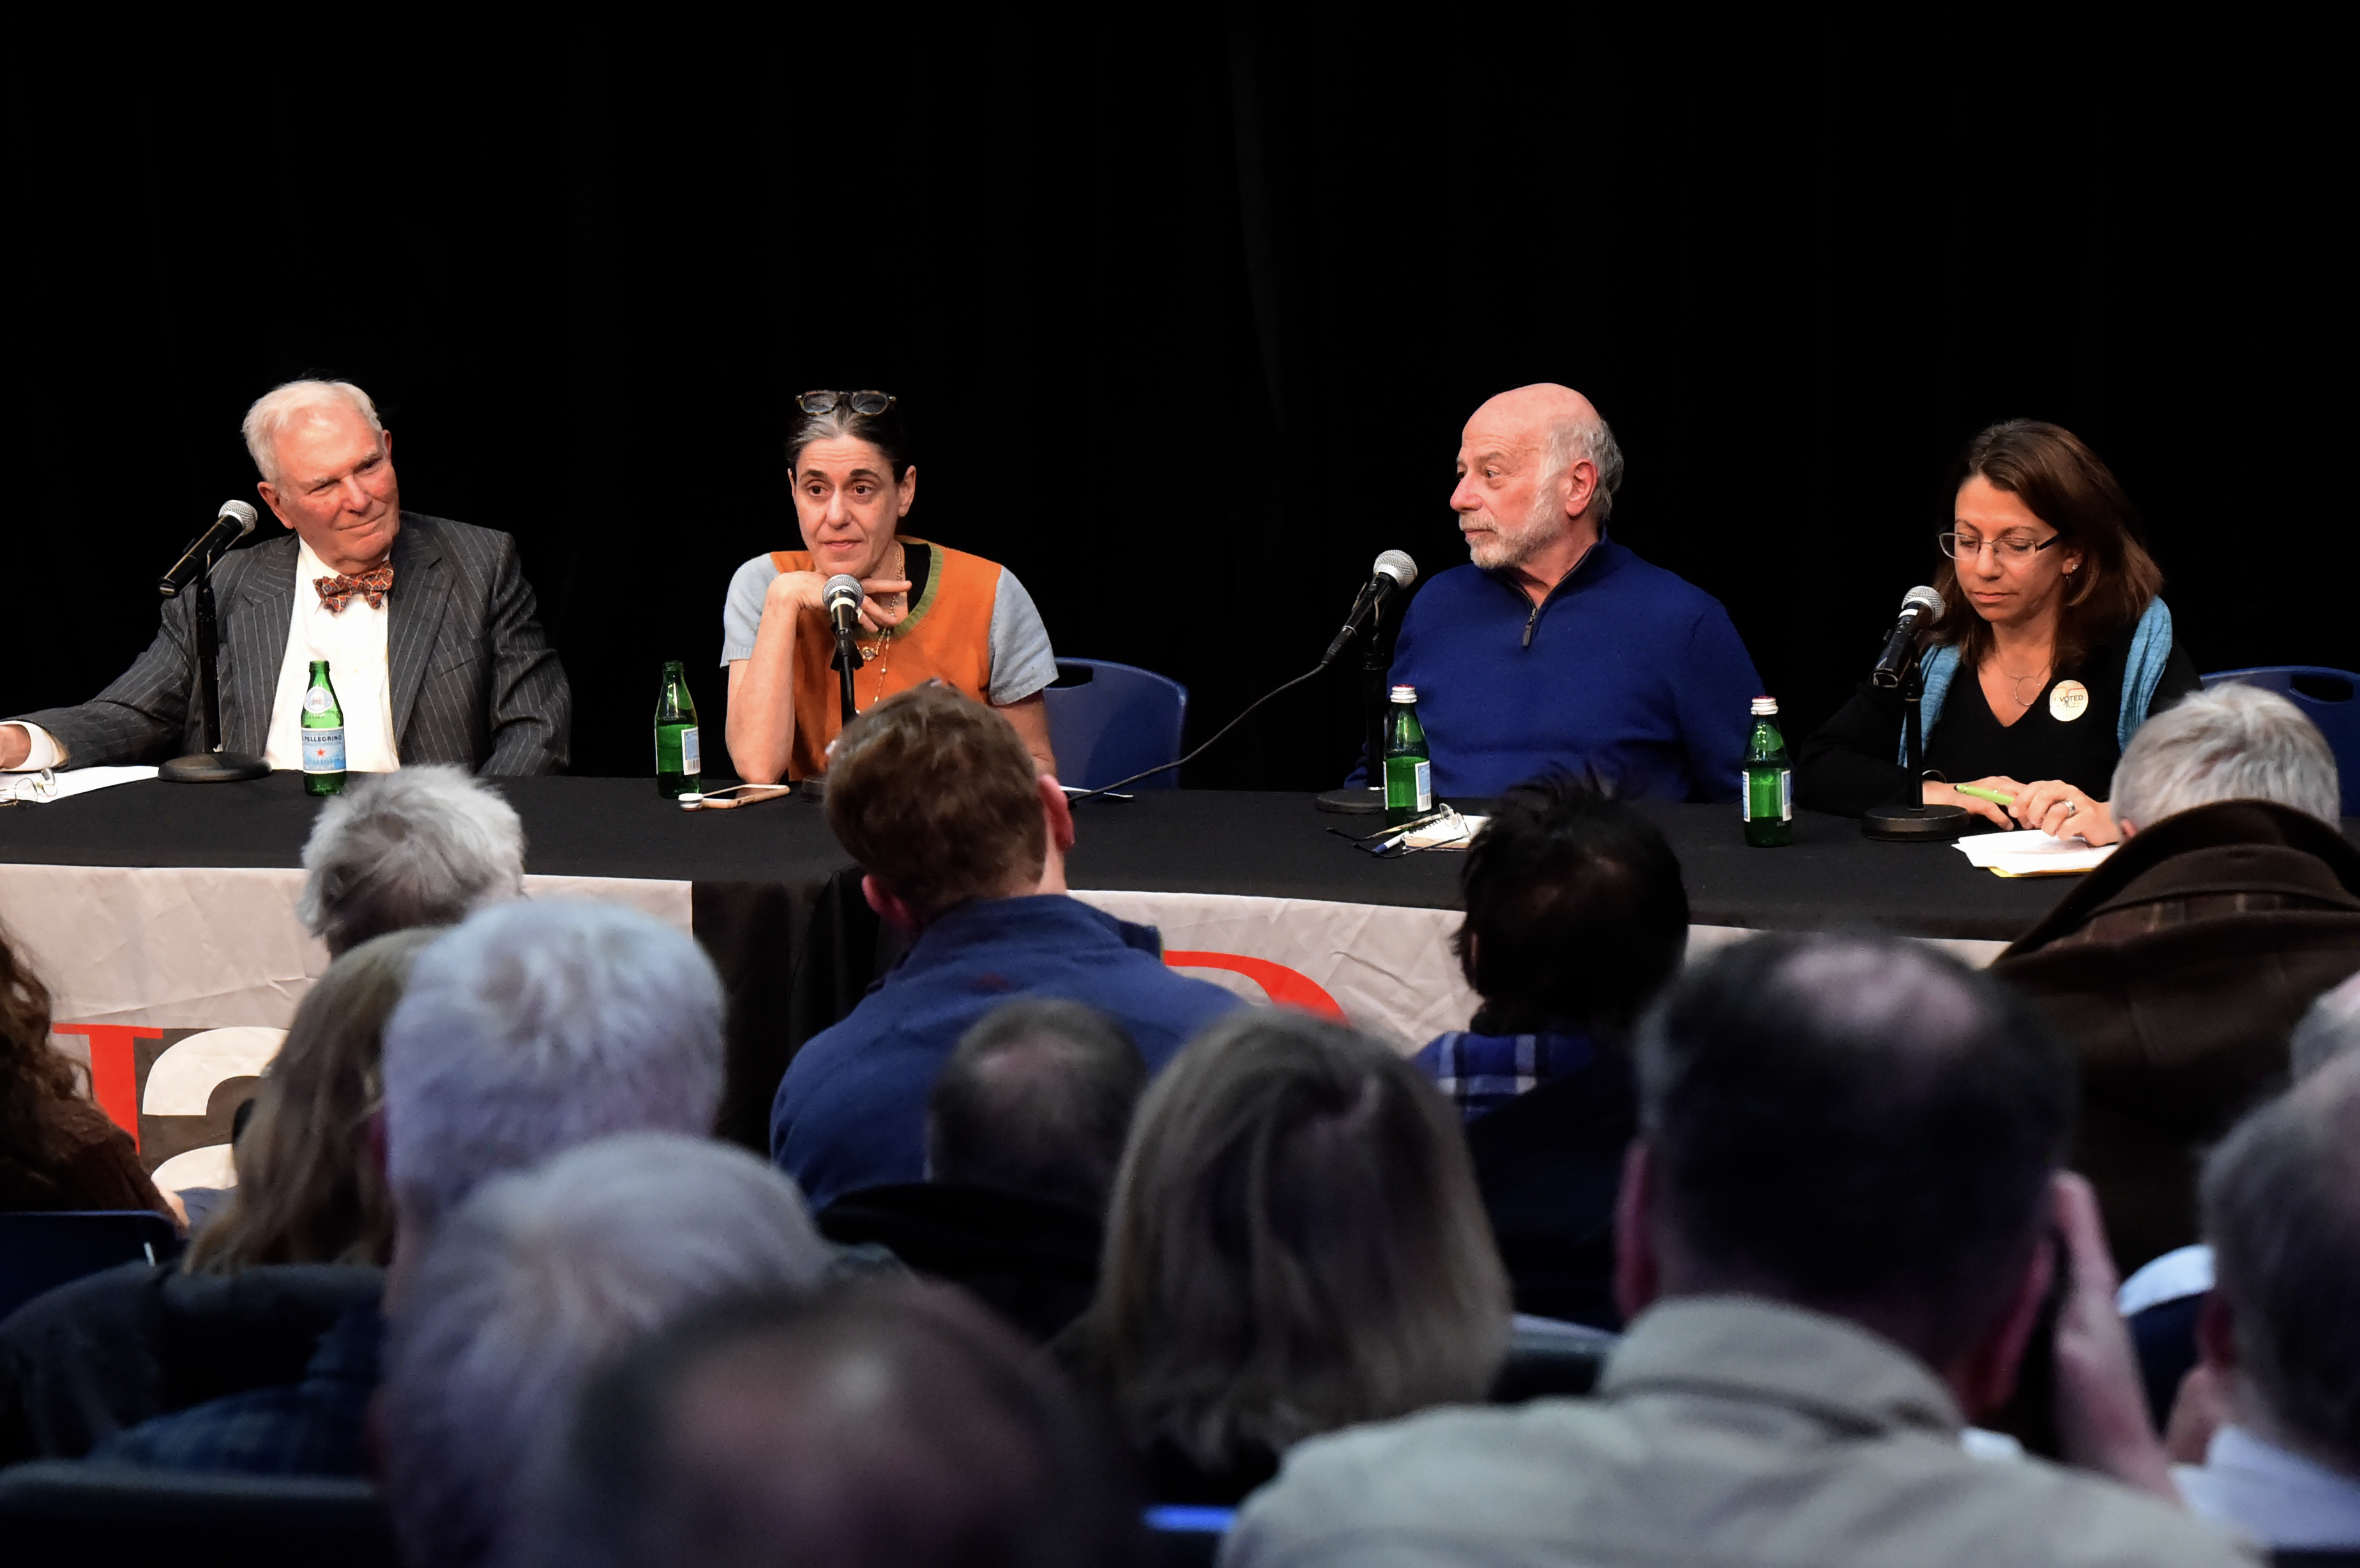 Ginia Bellafante (second from left) moderated the keynote panel discussion “Who Is Planning Brooklyn’s Future?” at the Brooklyn Heights Association’s annual meeting Tuesday, featuring (from left) Alexander Garvin, Tom Angotti and Michelle de la Uz. Eagle photos by Todd Maisel